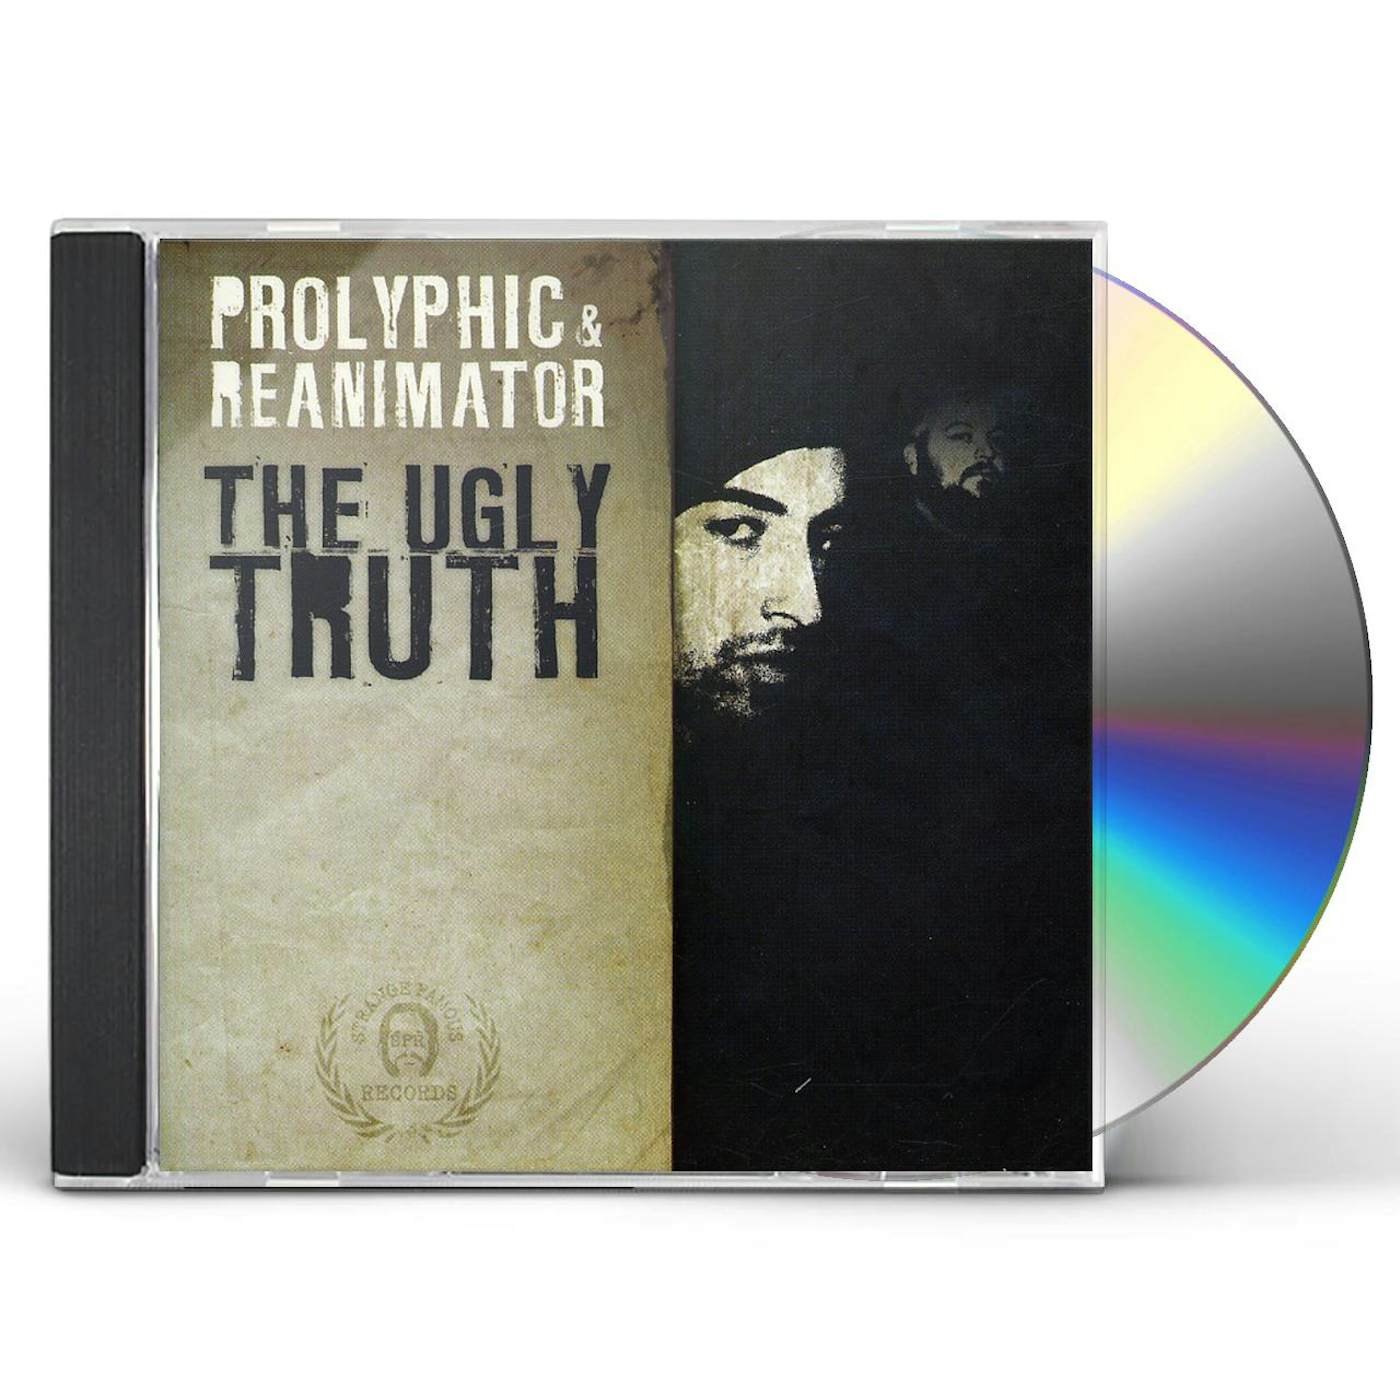 Prolyphic & Reanimator UGLY TRUTH CD